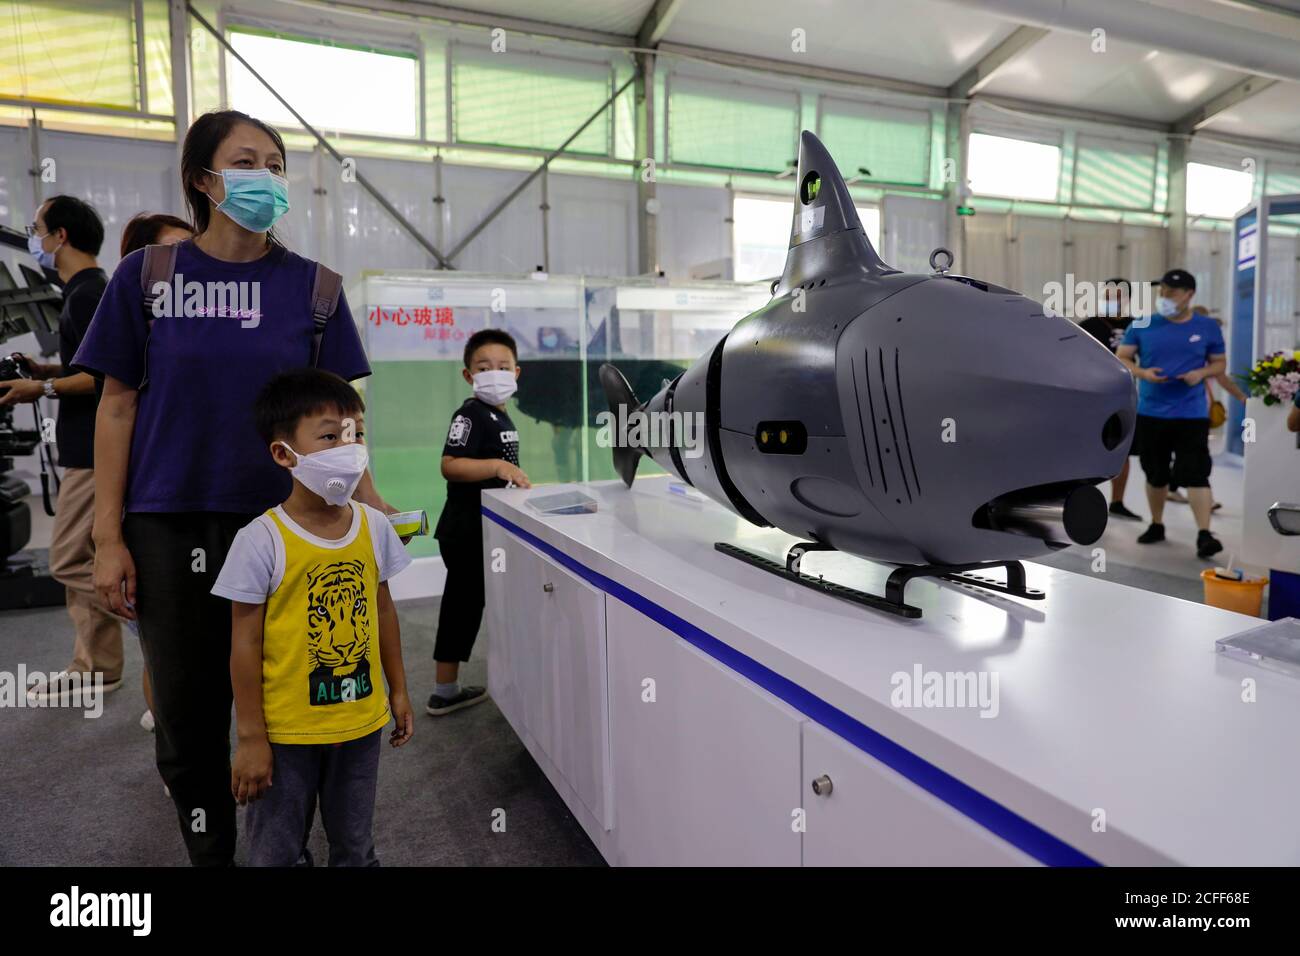 200905) -- BEIJING, Sept. 5, 2020 (Xinhua) -- People watch a bionic fish  named ROBO-SHARK 1850A in the service robots exhibition area of the 2020  China International Fair for Trade in Services (